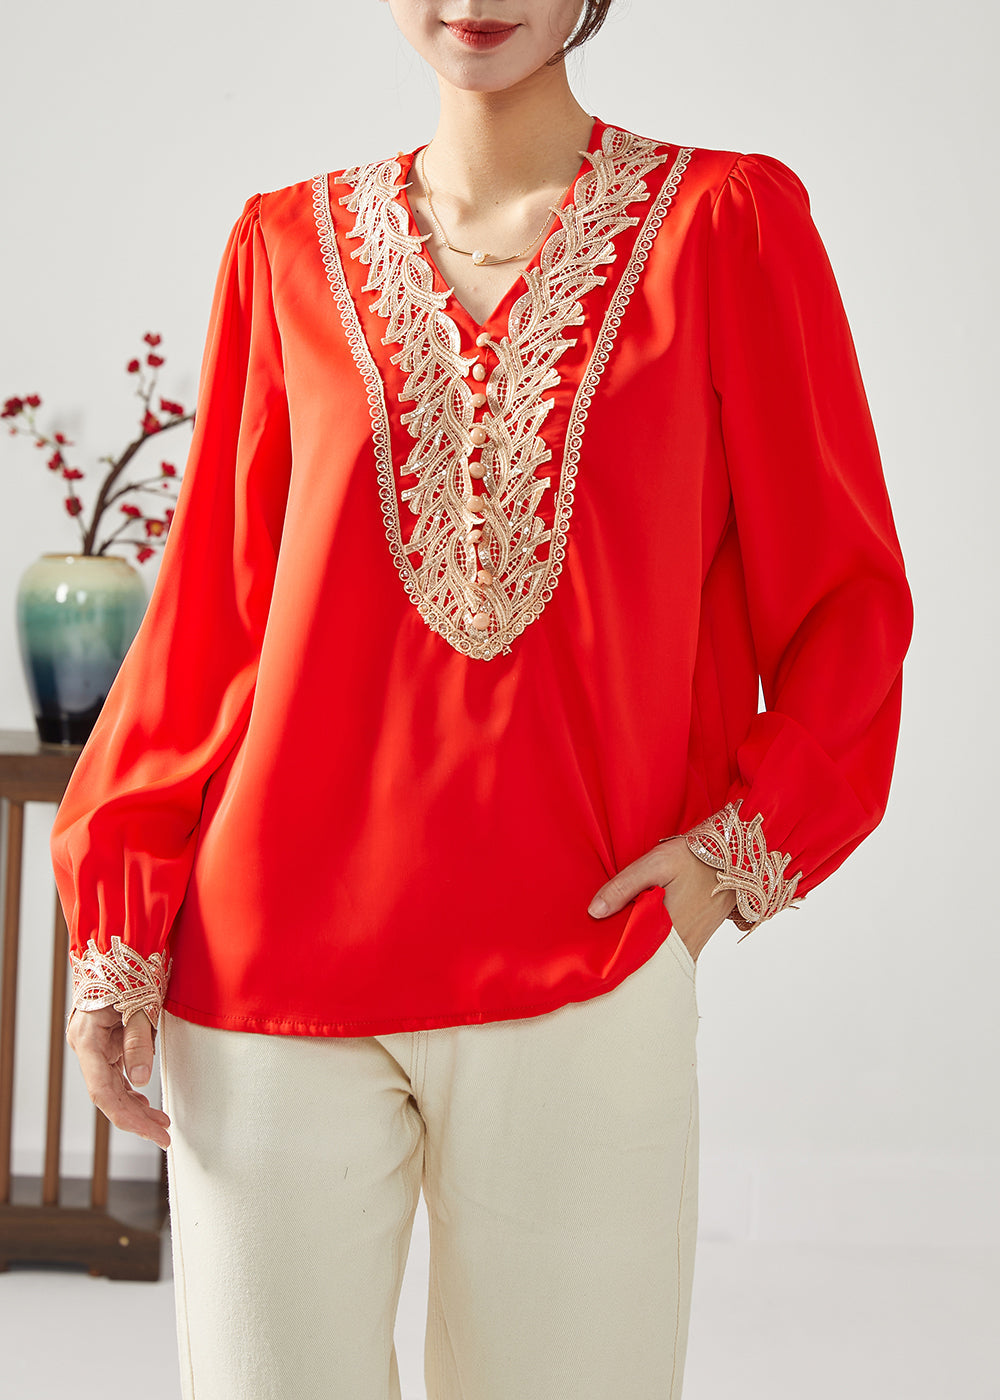 Classy Red V Neck Patchwork Draping Chiffon Tops Spring LC0384 - fabuloryshop